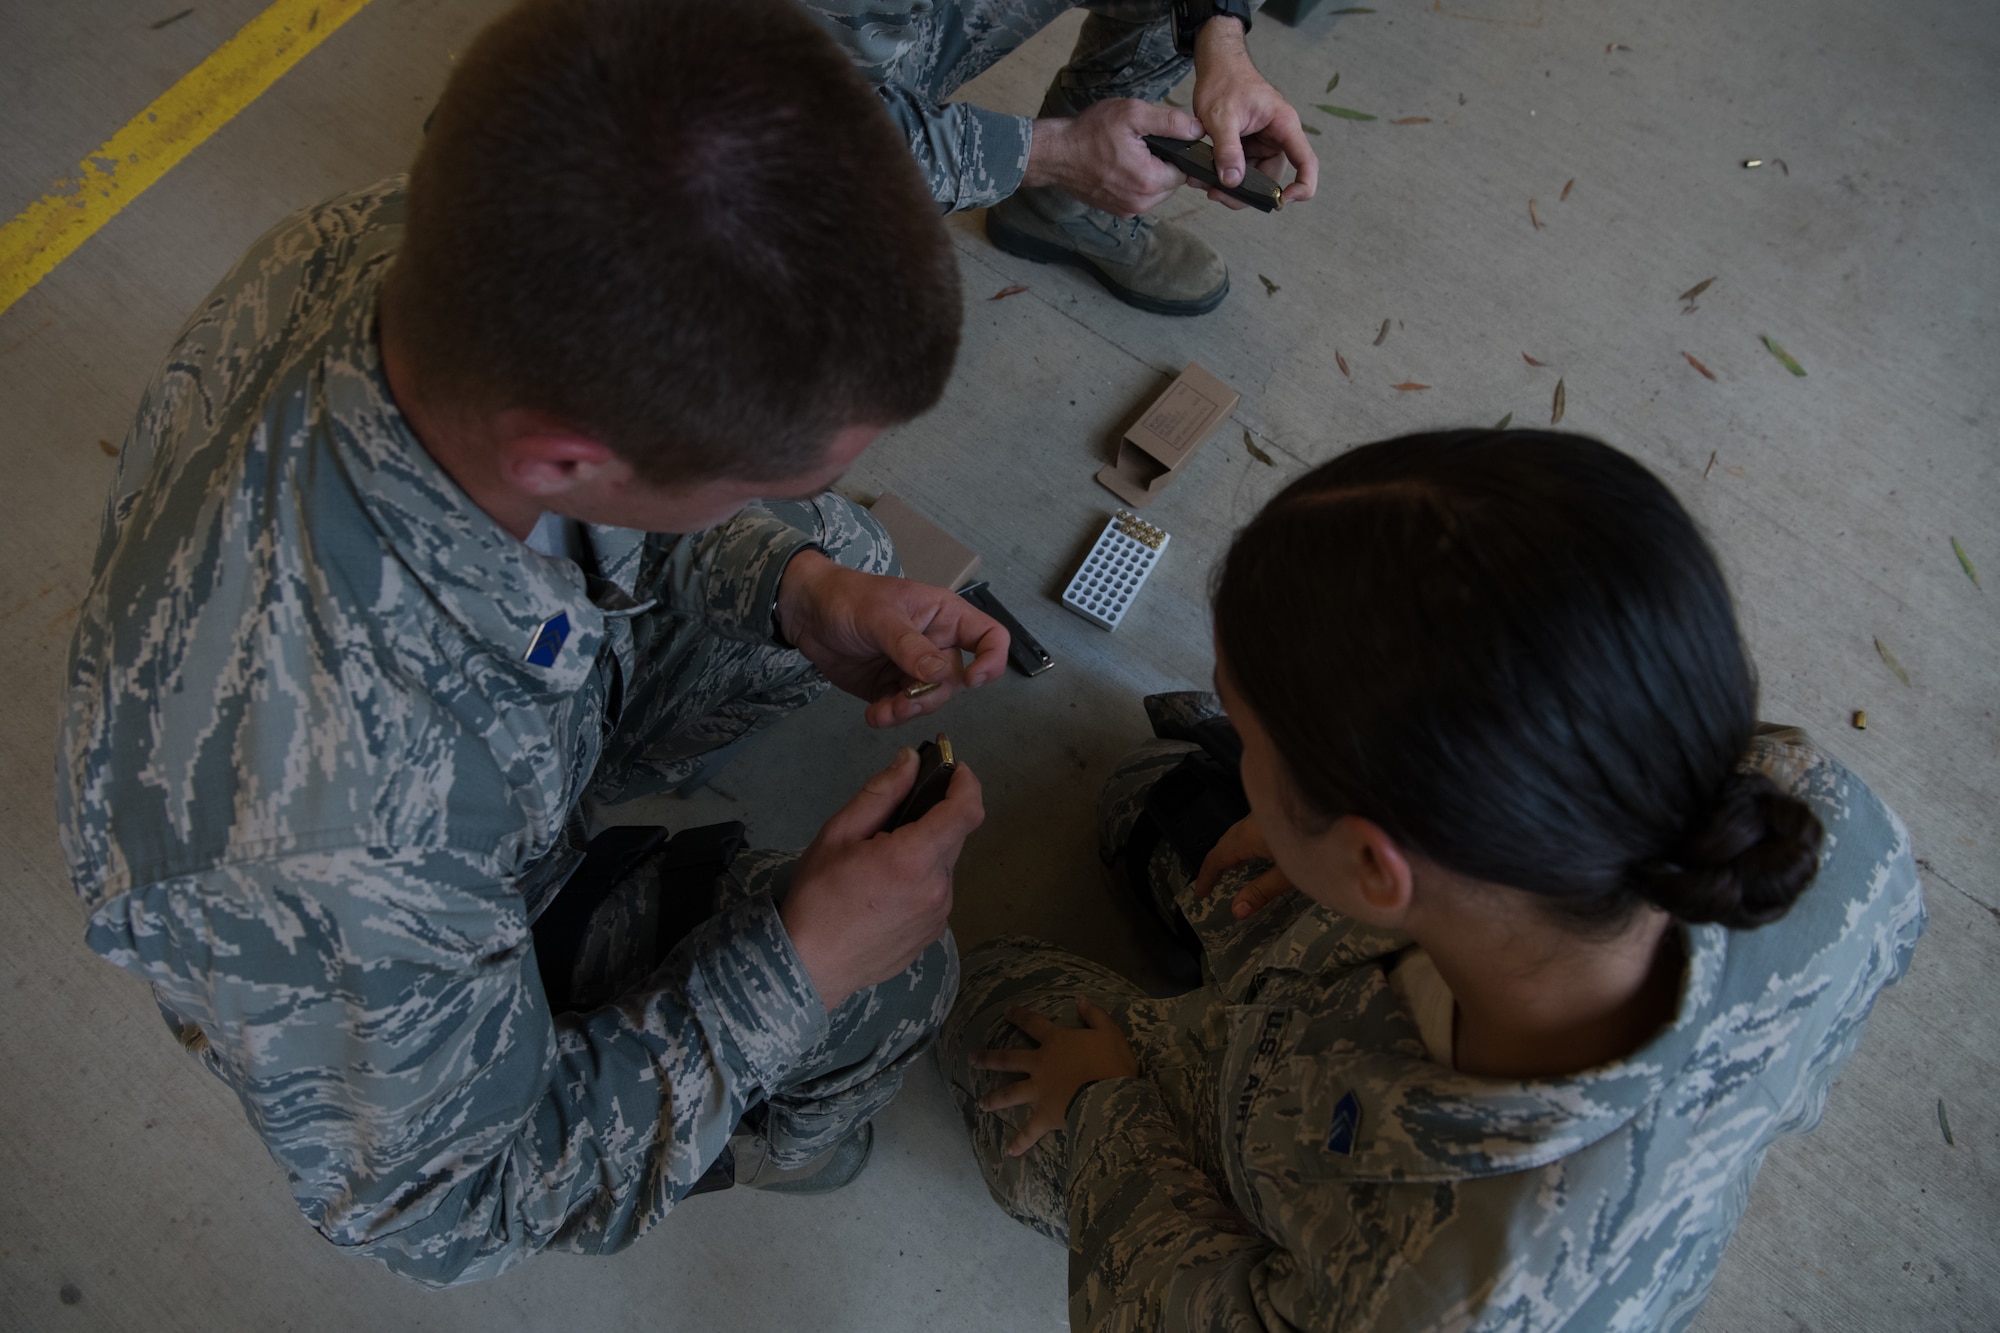 An Air Force Reserve Officer Training Corps cadet demonstrates to a fellow cadet how to properly load ammunition into her handgun’s magazine July 9, 2020, at the Combat Arms Training and Maintenance range on Maxwell Air Force Base, Alabama.